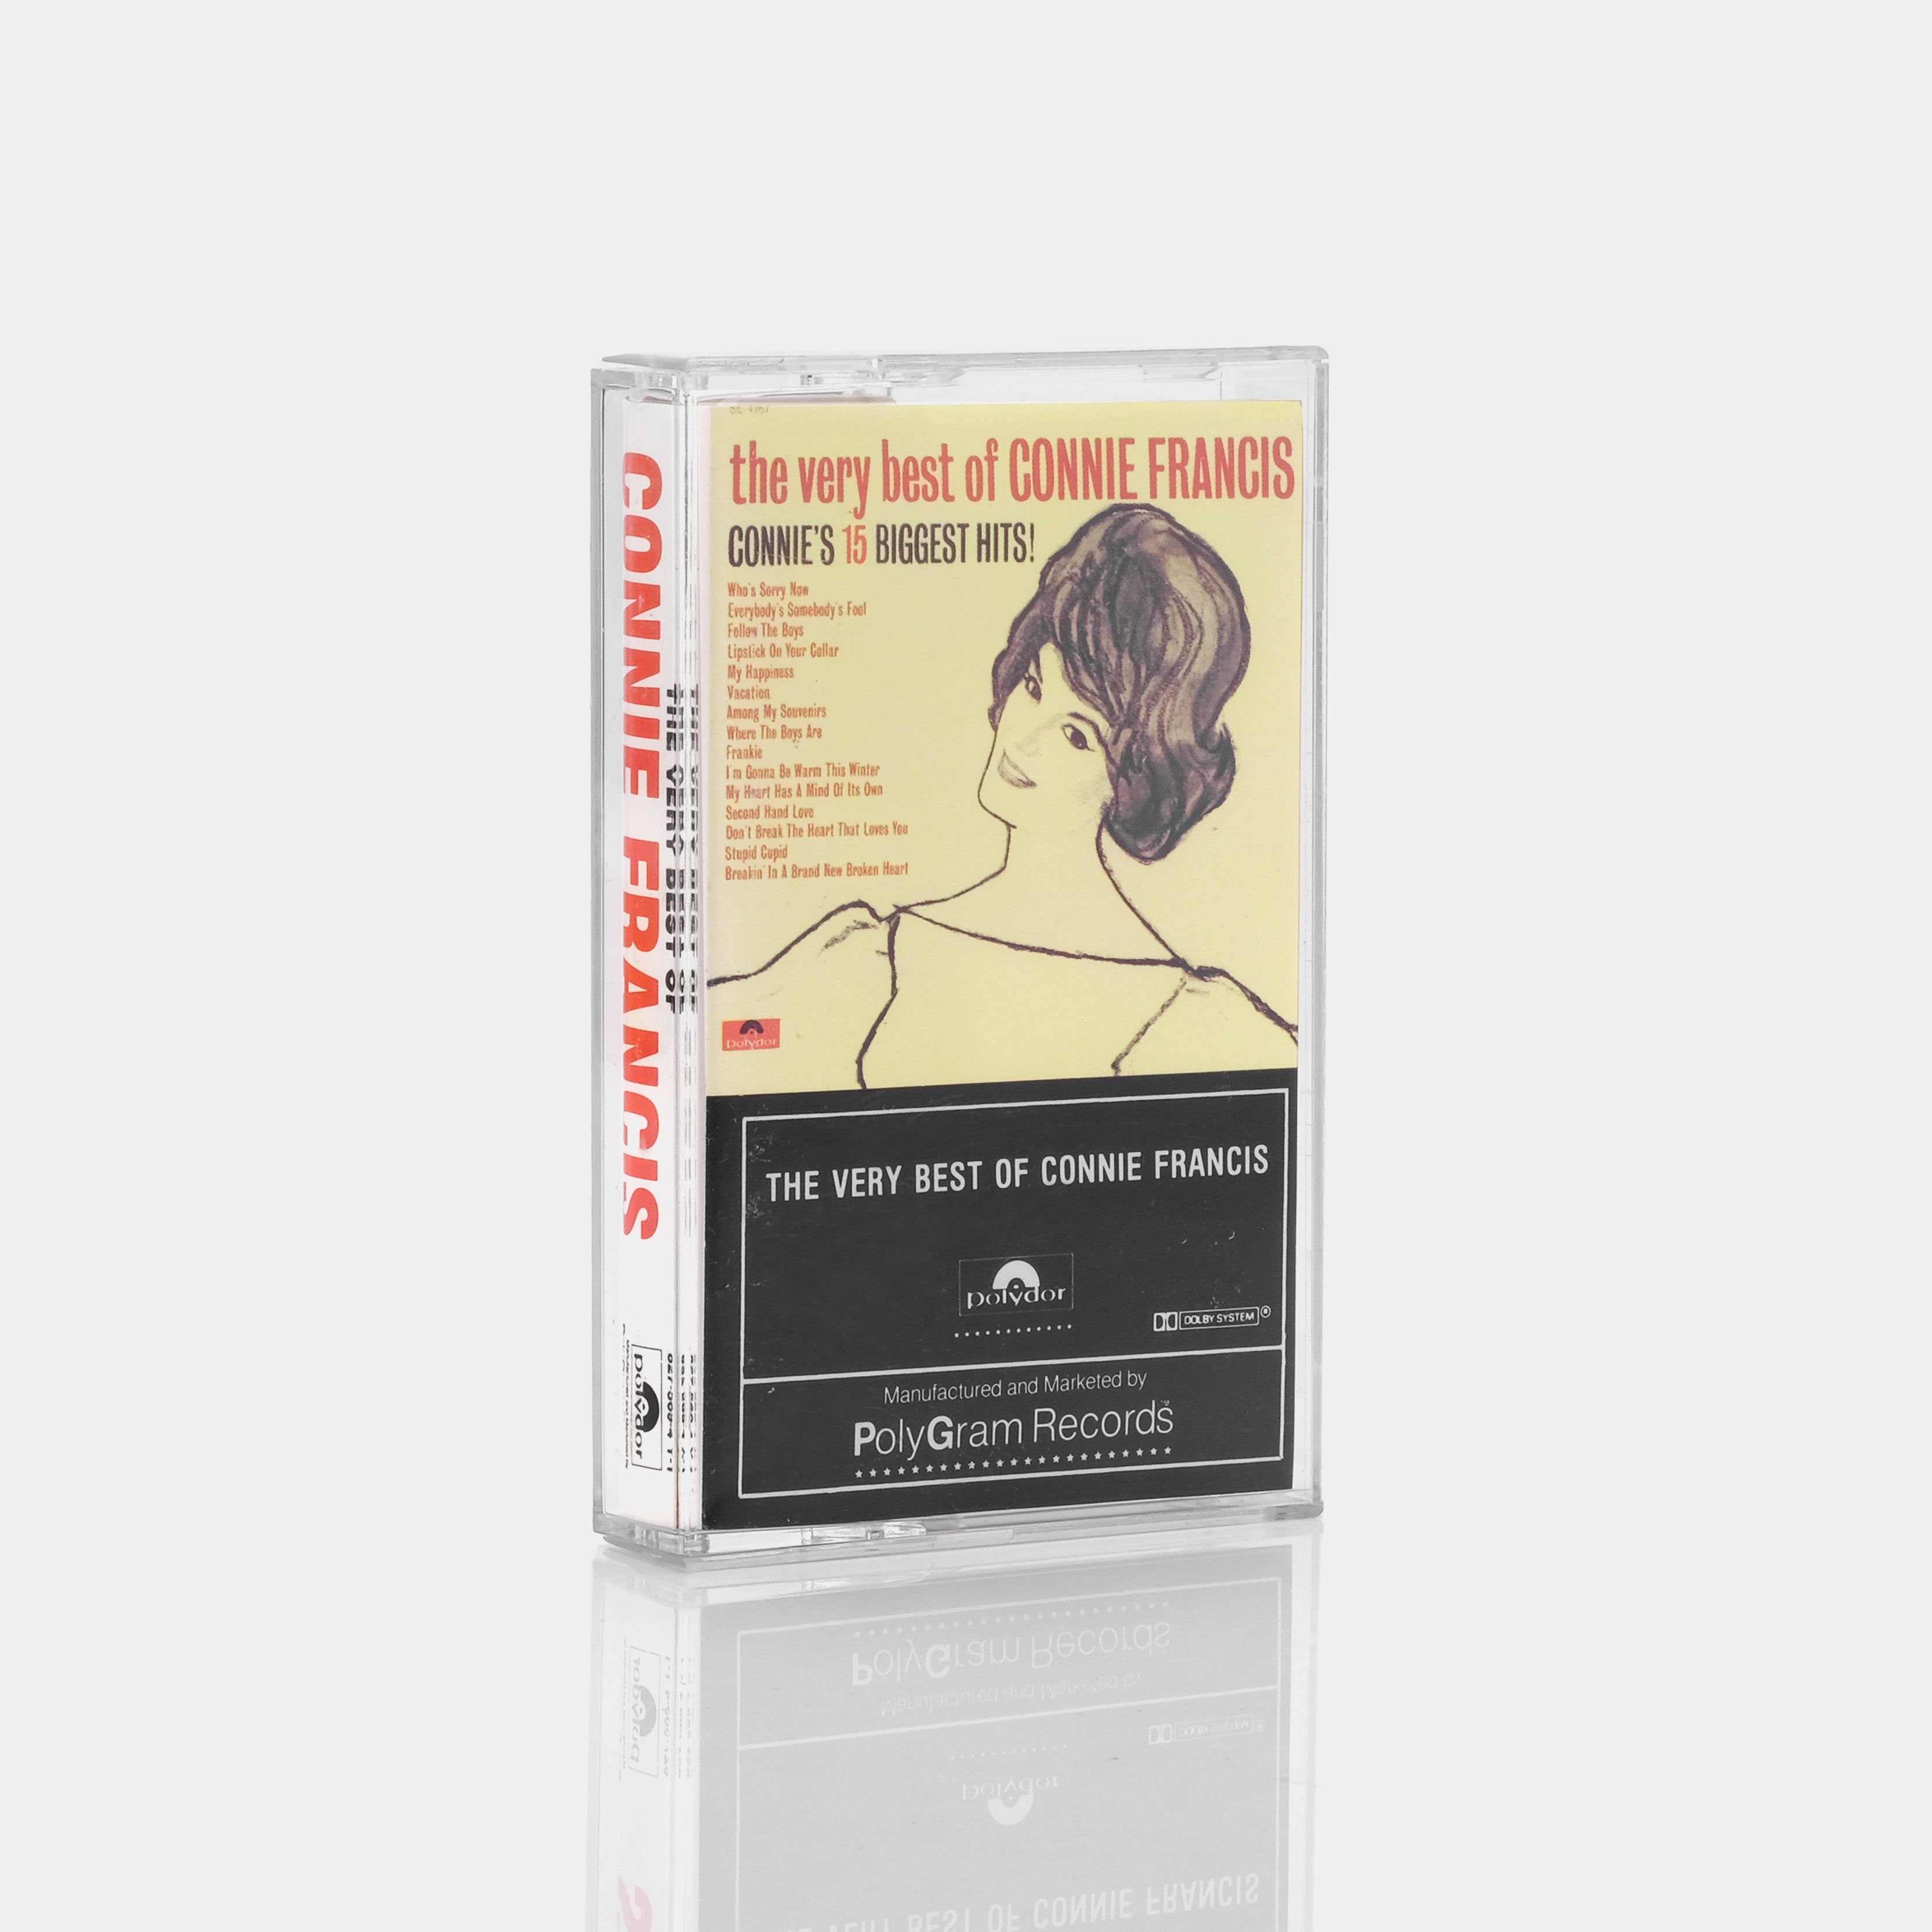 Connie Francis - The Very Best Of Connie Francis Cassette Tape